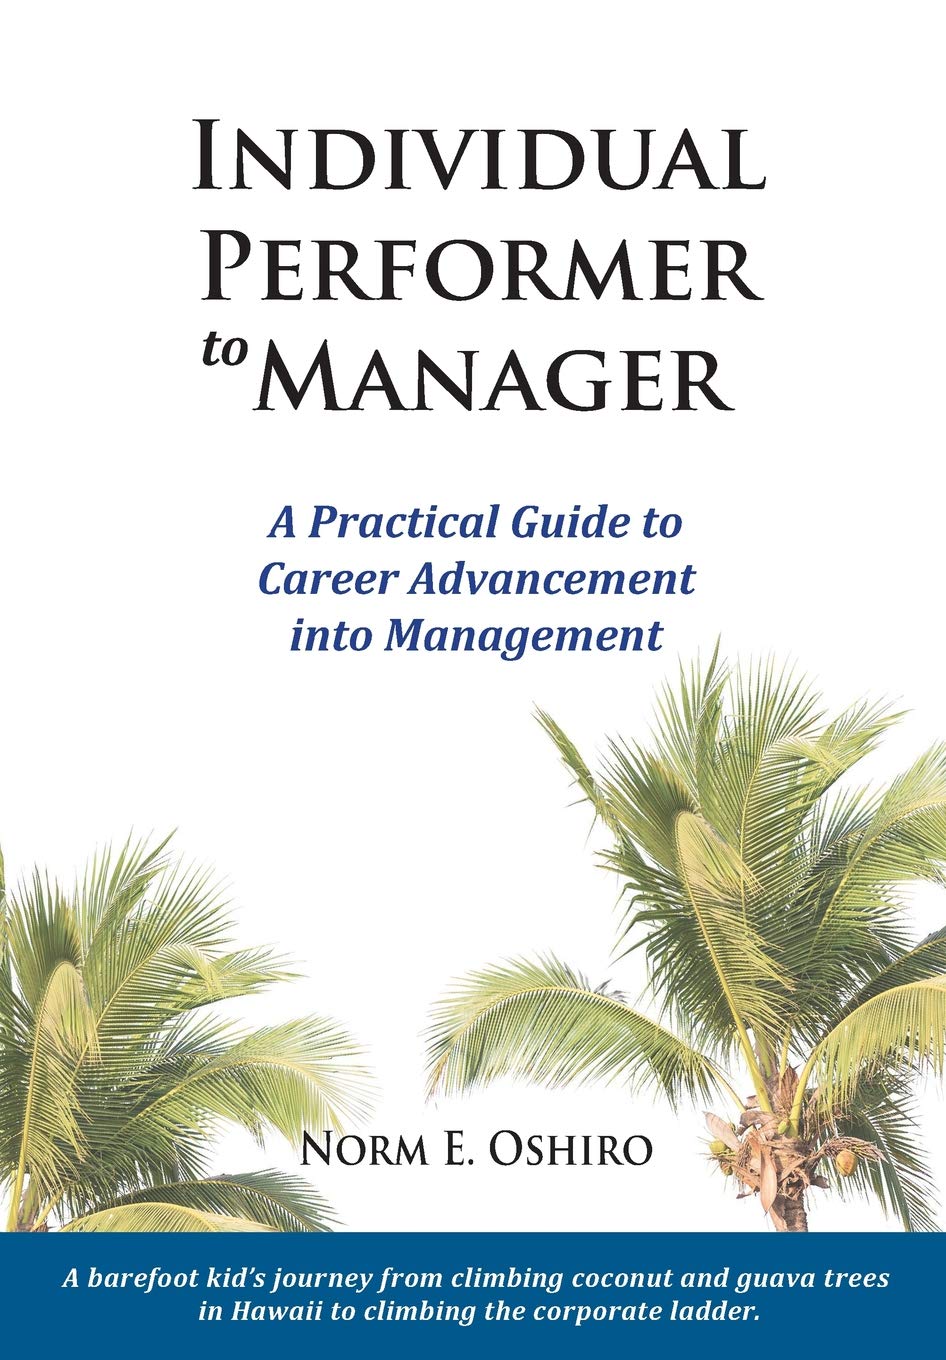 Individual Performer to Manager - A Practical Guide to Career Advancement into Management